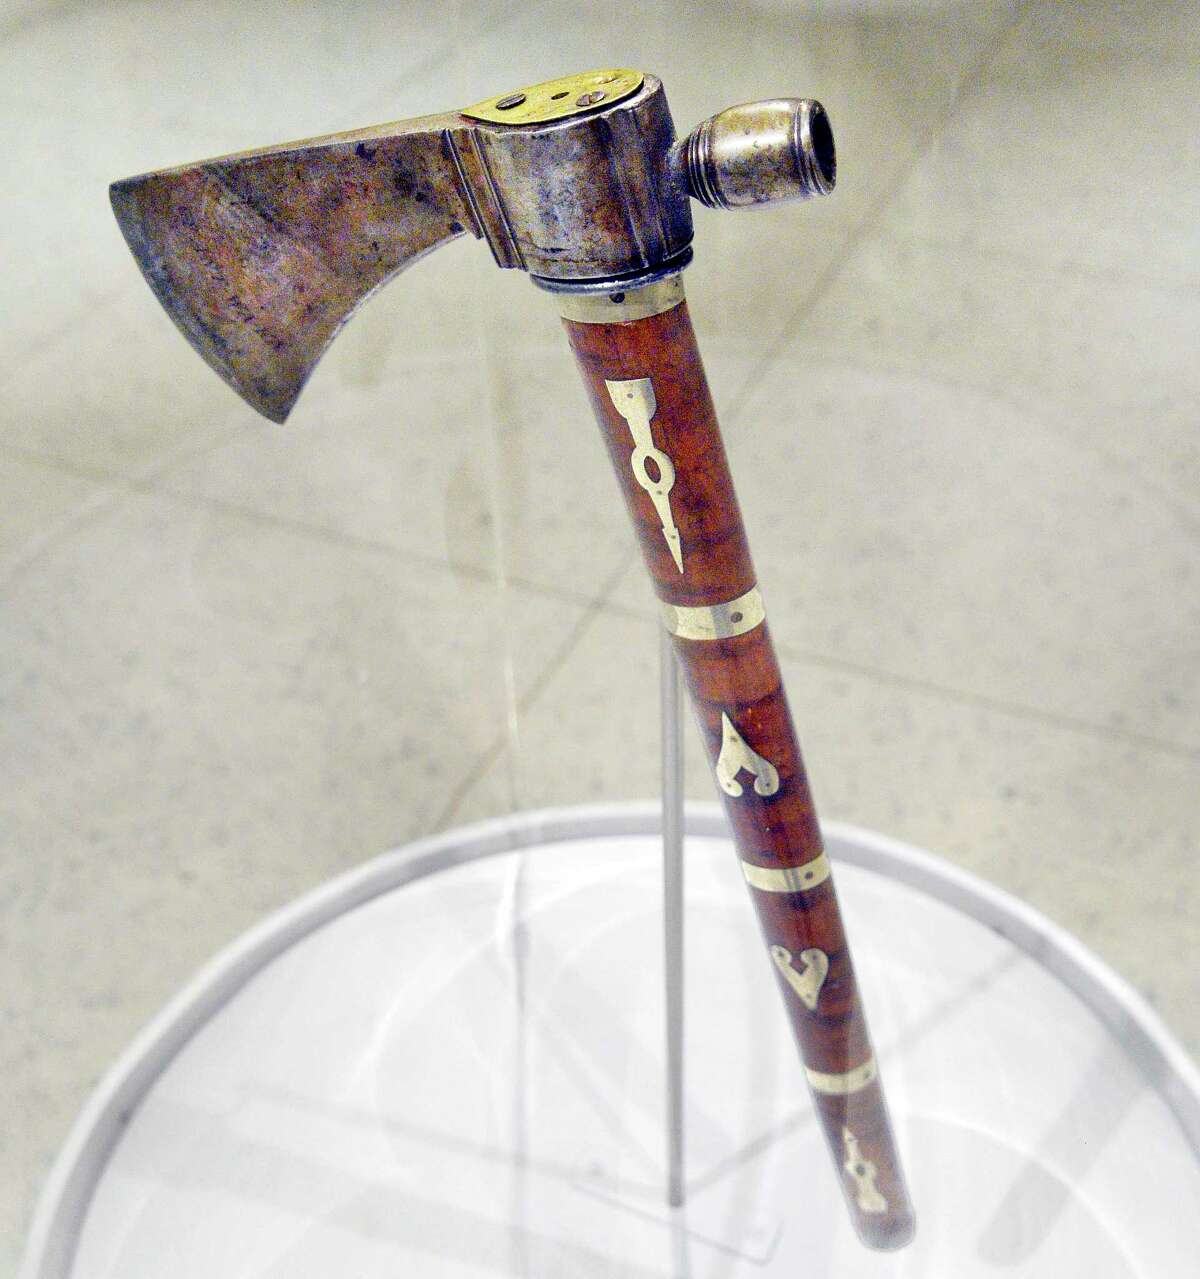 An 18th-century Native American tomahawk gifted to Cornplanter, the respected Seneca leader, by President George Washington in 1792 on exhibit at the NYS Museum Tuesday July 17, 2018 in Albany, NY. Thanks to the generosity of an anonymous collector, the pipe tomahawk was returned to the State Museum's collections last month. (John Carl D'Annibale/Times Union)